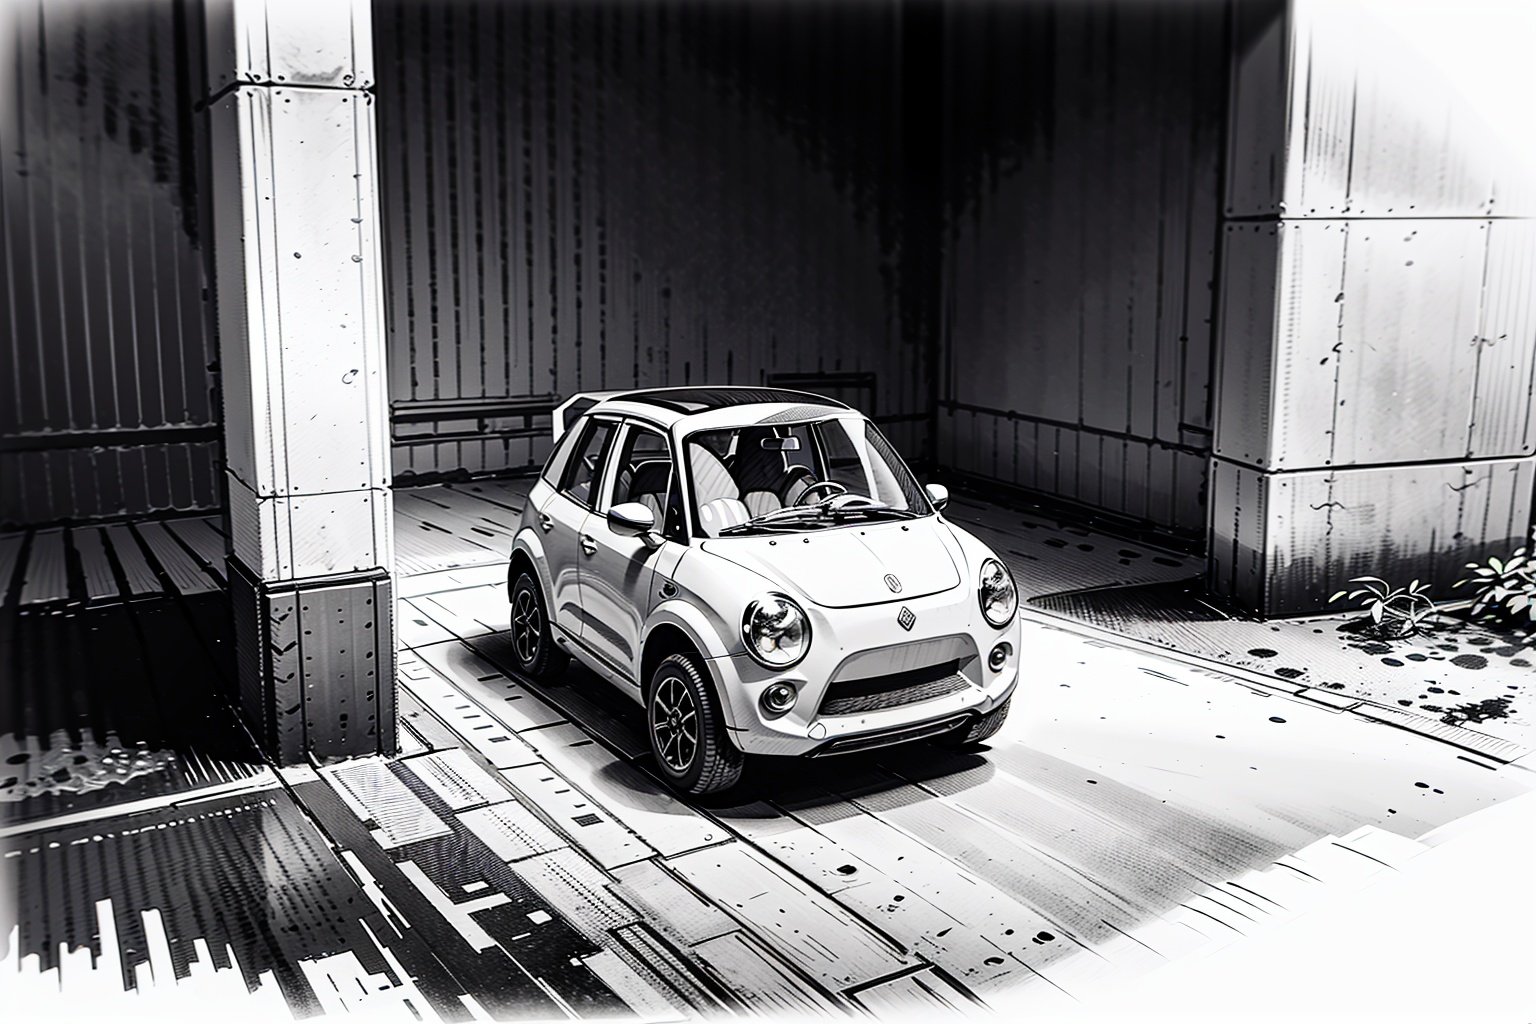  Drawing of micro vehicle, sketch artstyle, grayscale, monochrome